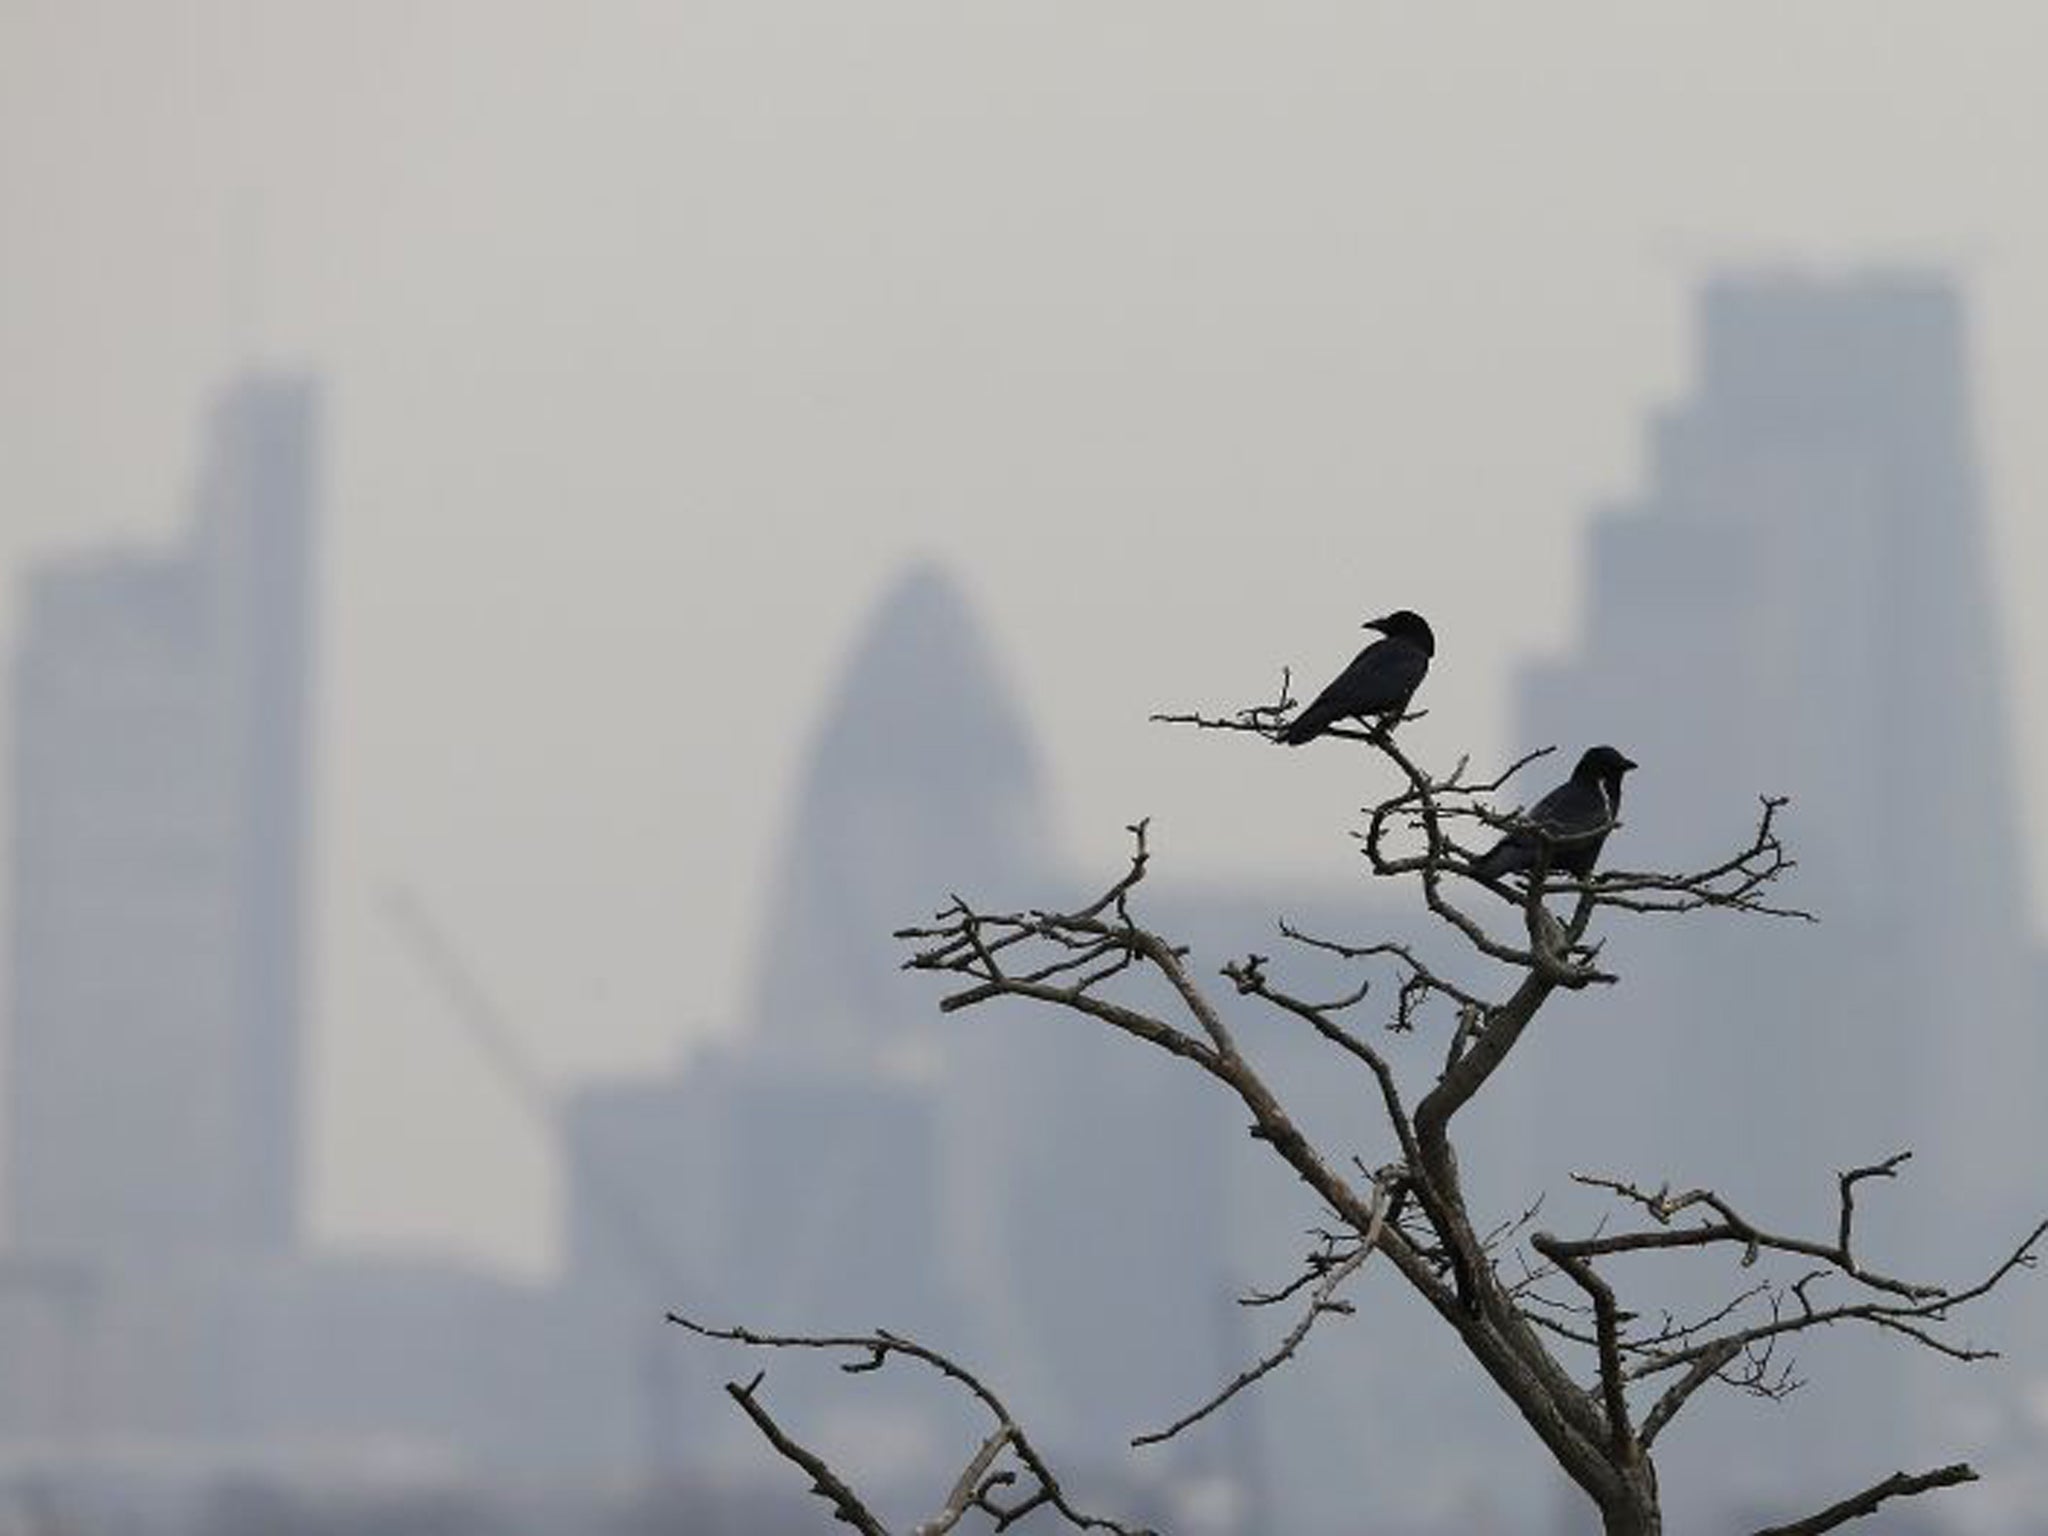 Smog surrounds the City of London